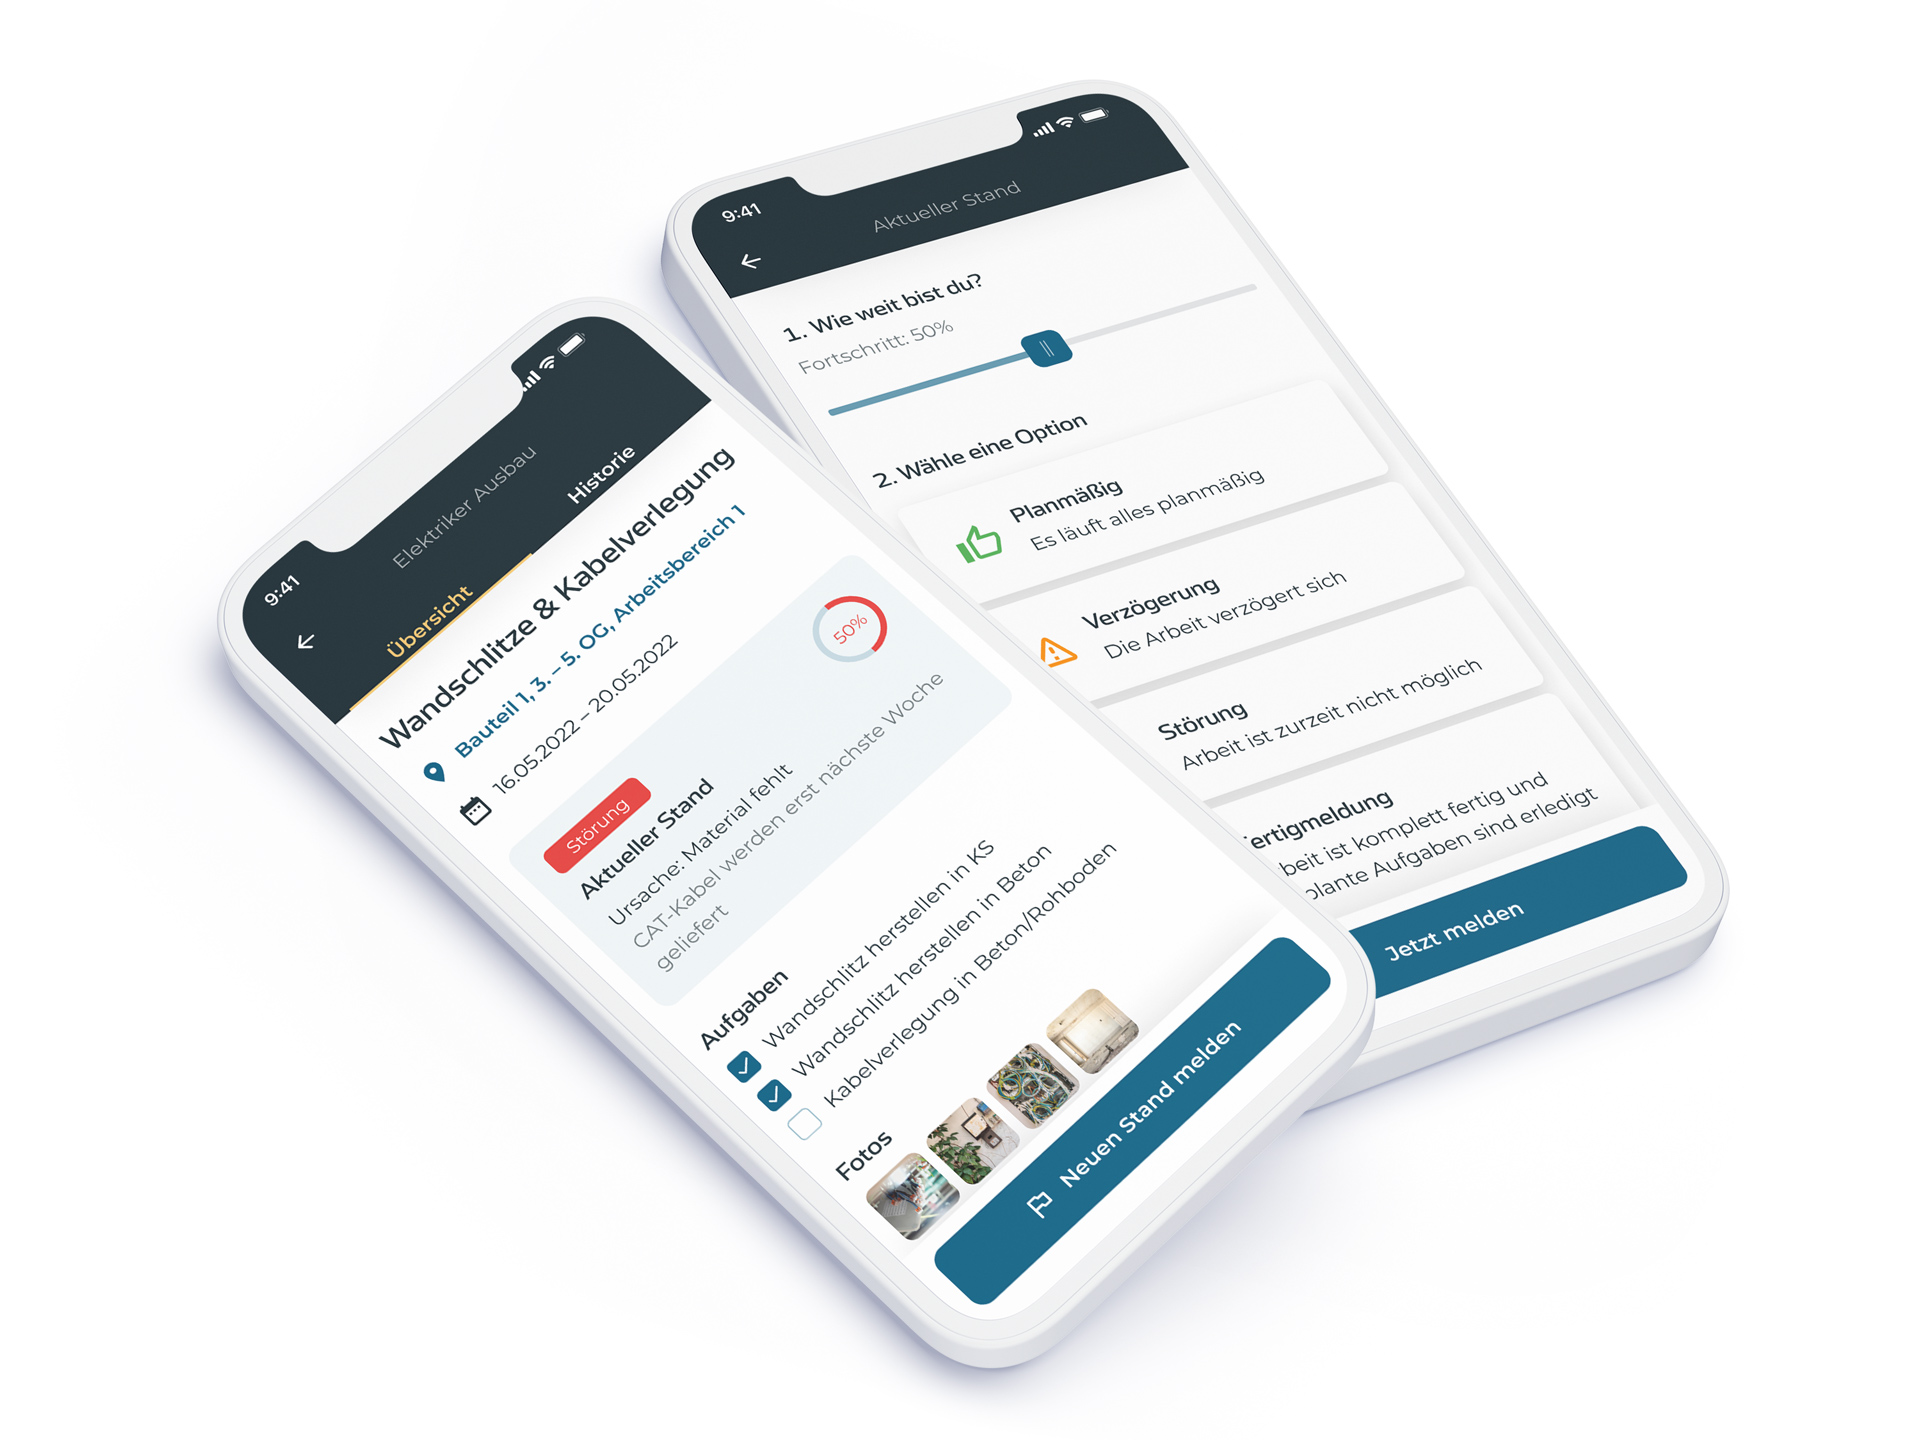 Site app gives an overview of appointments, tasks, status reports and photo documentation